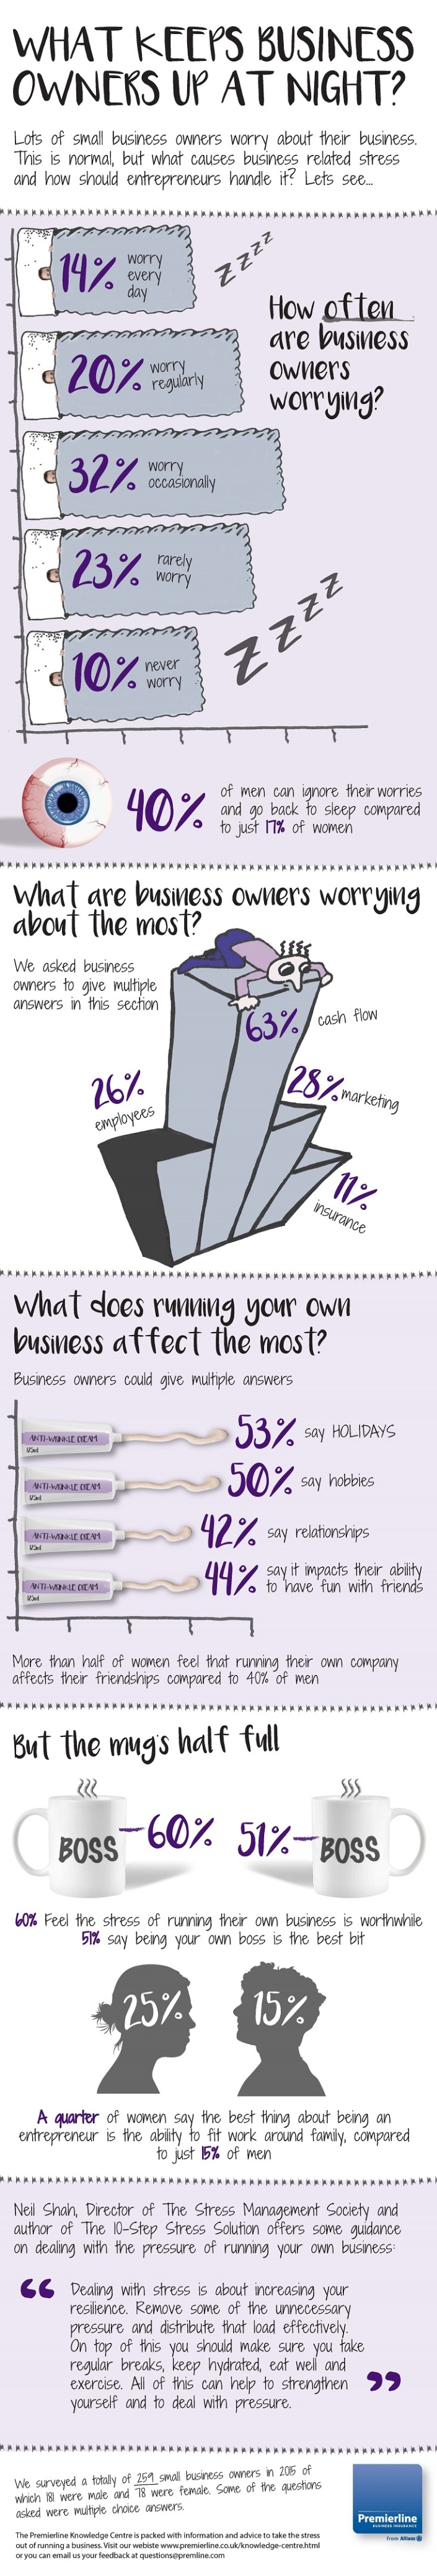 Infographic - what keeps business owners up at night.jpg